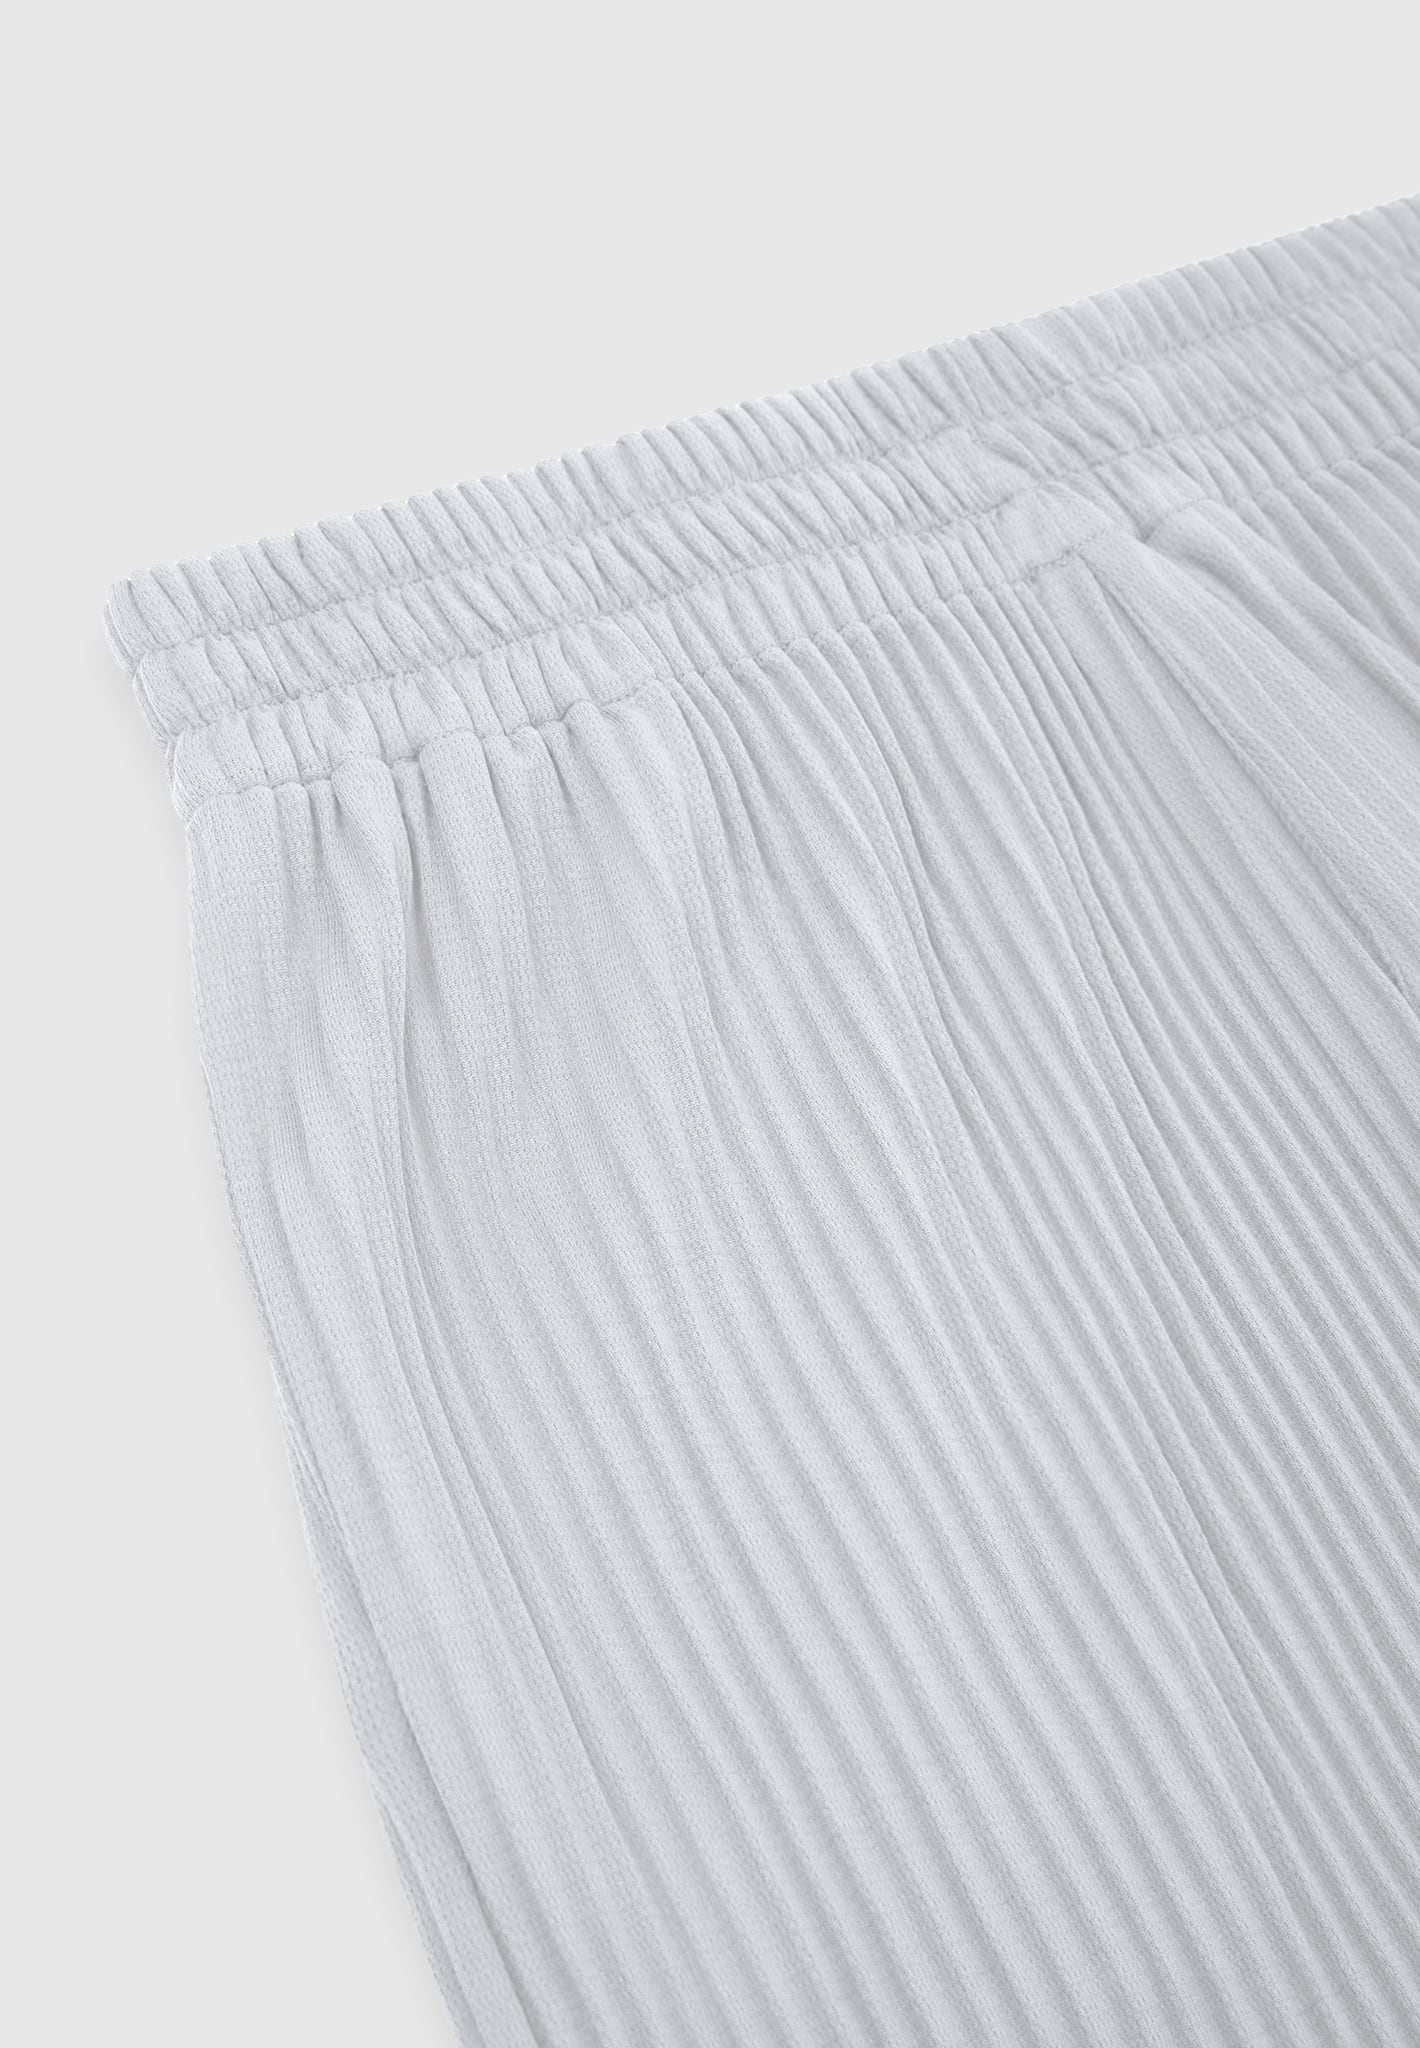 pleated-trousers-iced-grey